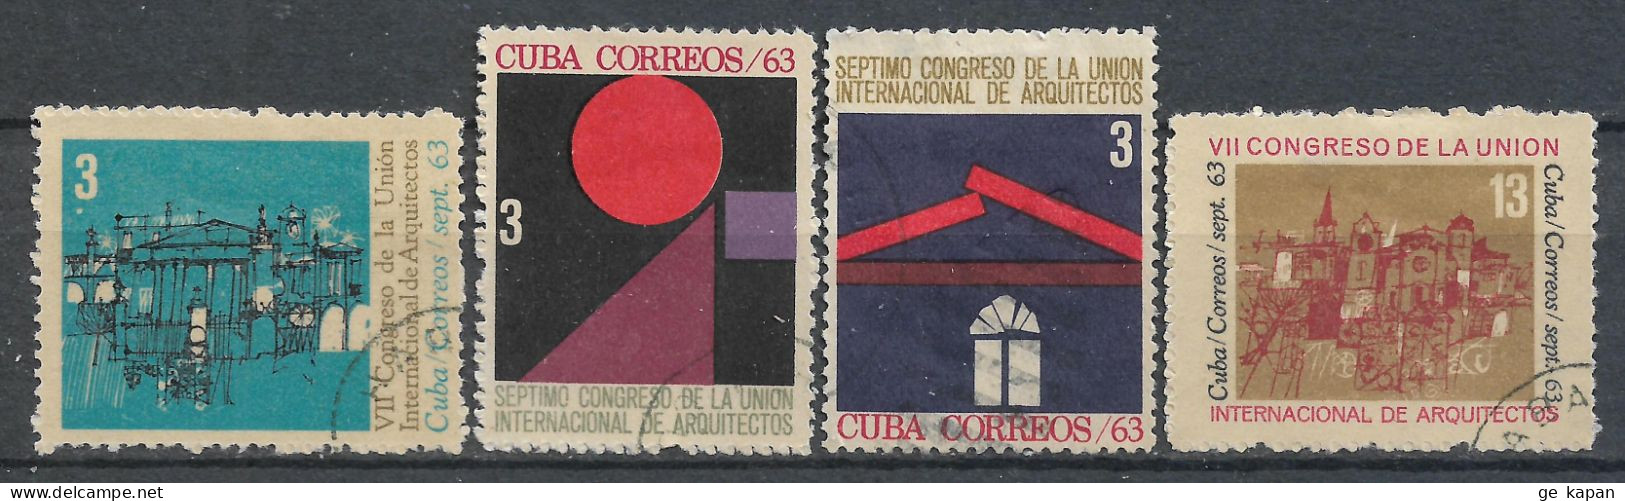 1963 CUBA SET OF 4 USED STAMPS (Michel # 864,865,867,870) CV €1.60 - Used Stamps